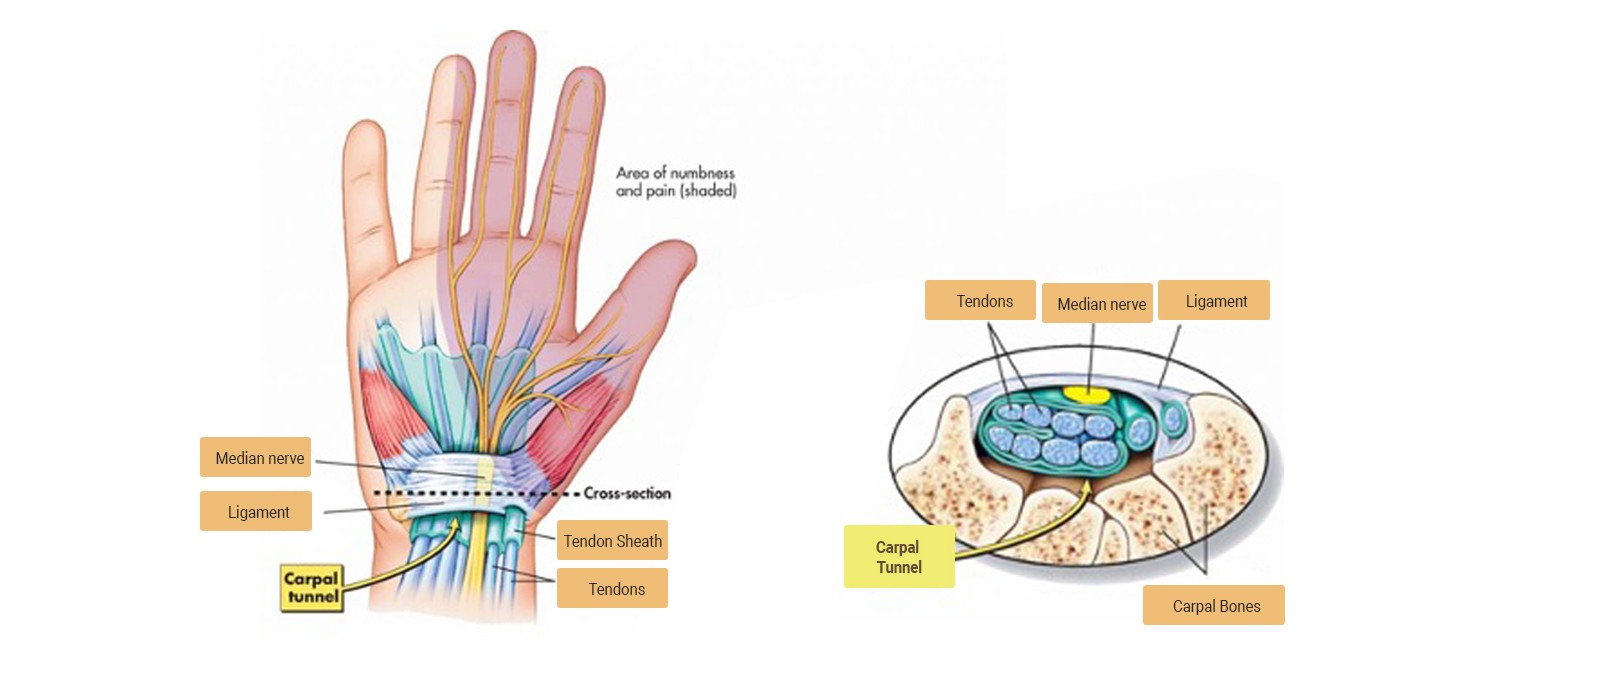 chiropractic-care-for-carpal-tunnel-syndrome - Dr Sima Goel